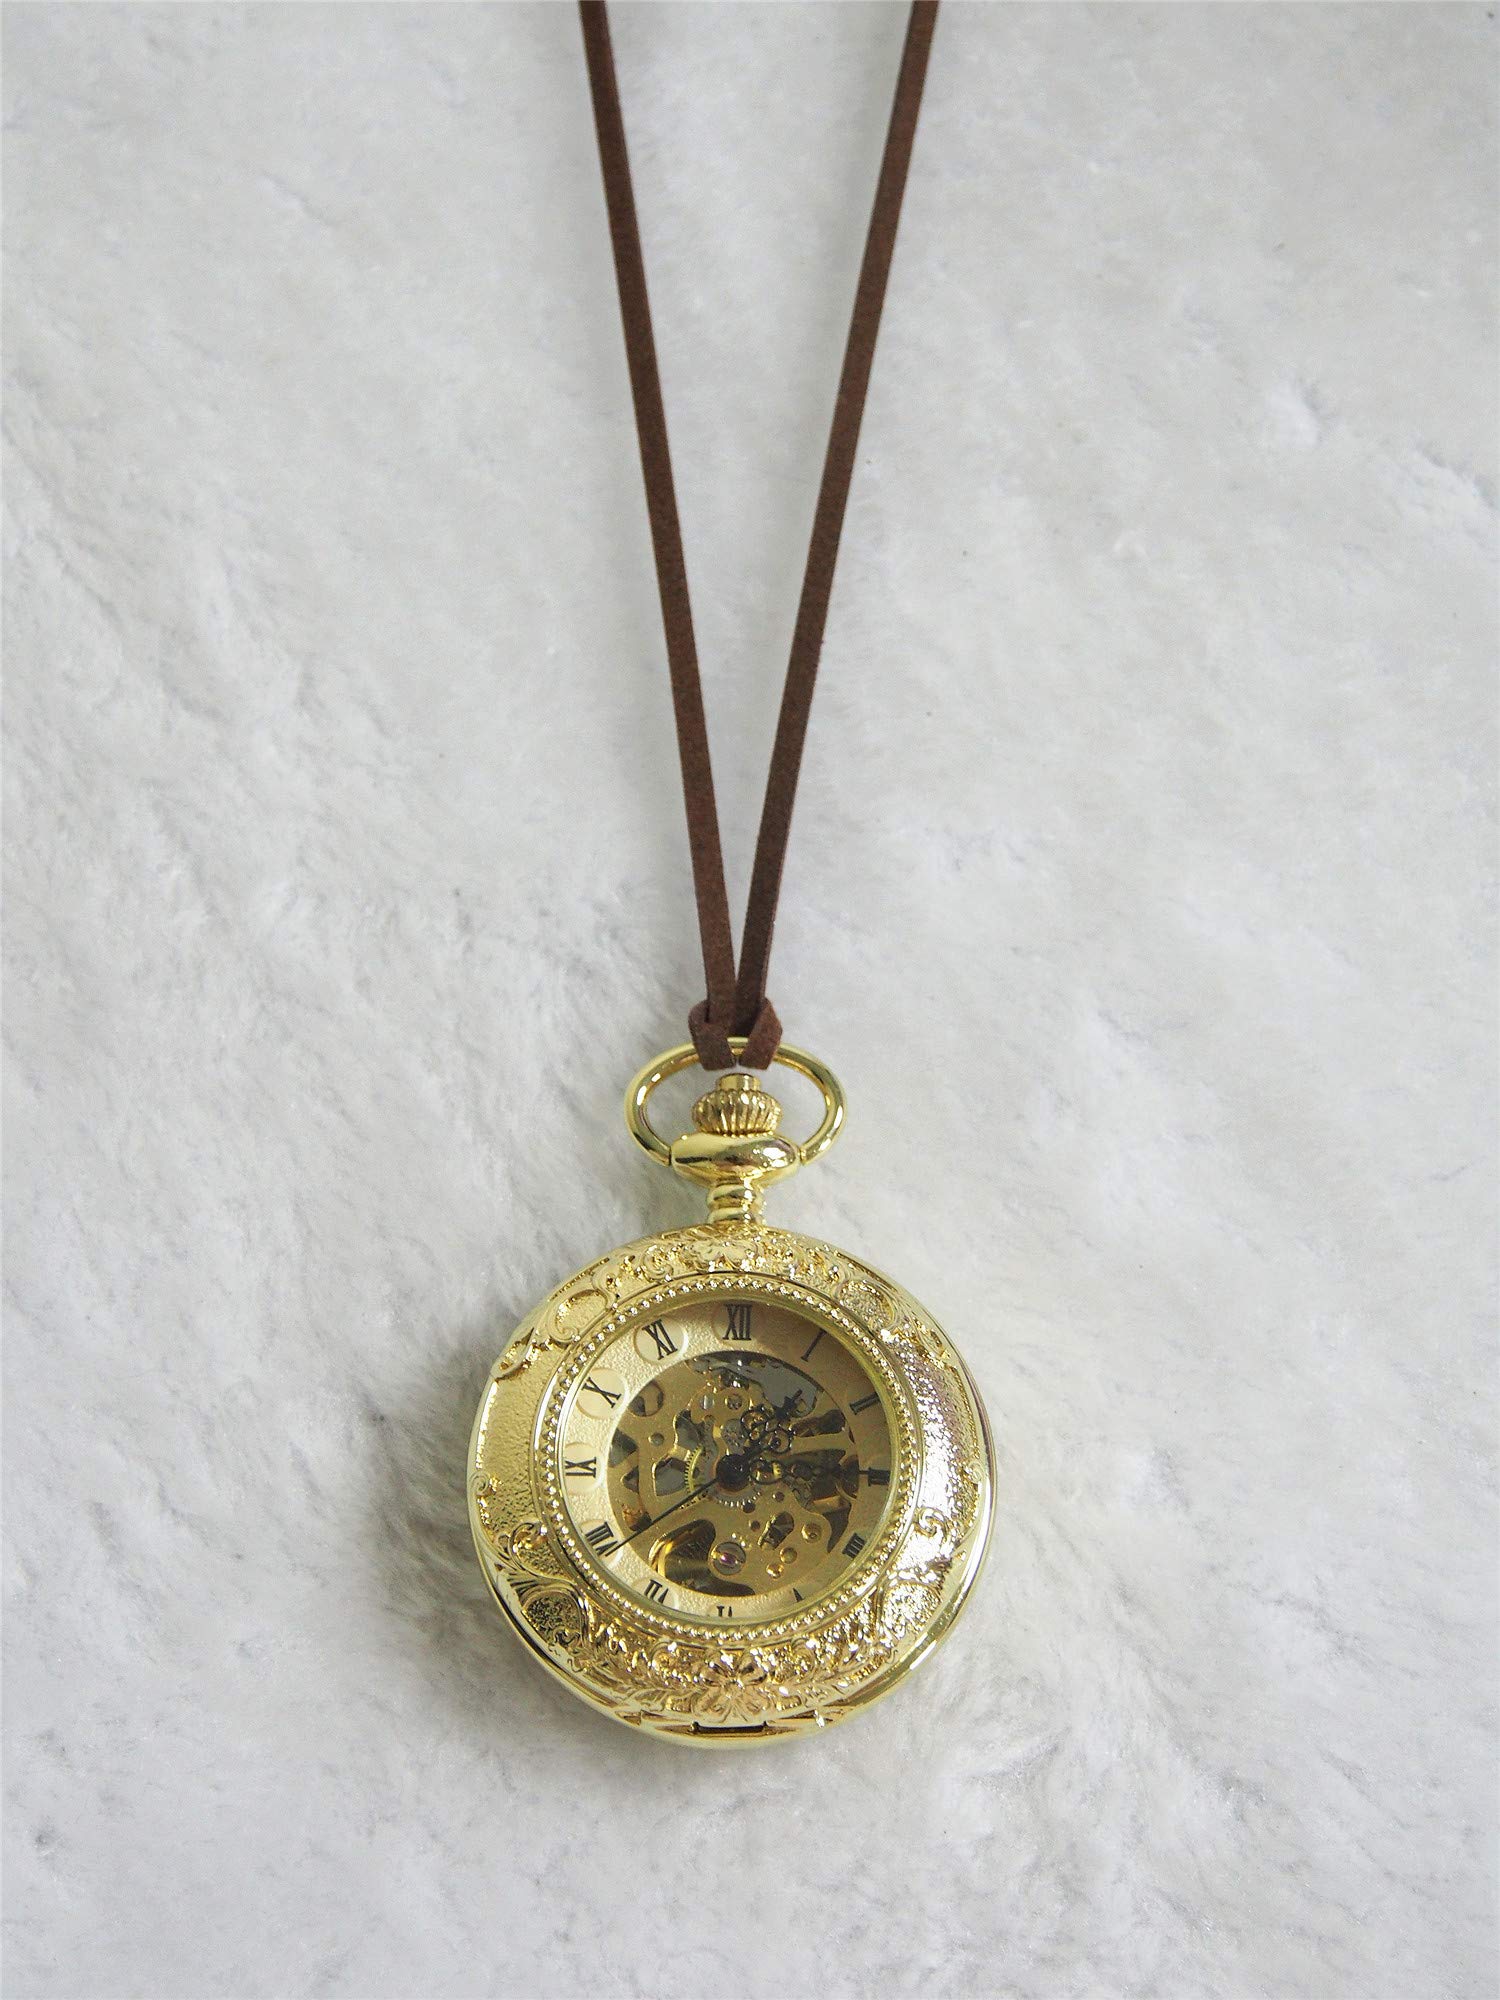 SEWOR Business Double Open Skeleton Pocket Watch with Chain, Mechanical Hand Wind Movement Full Hunter